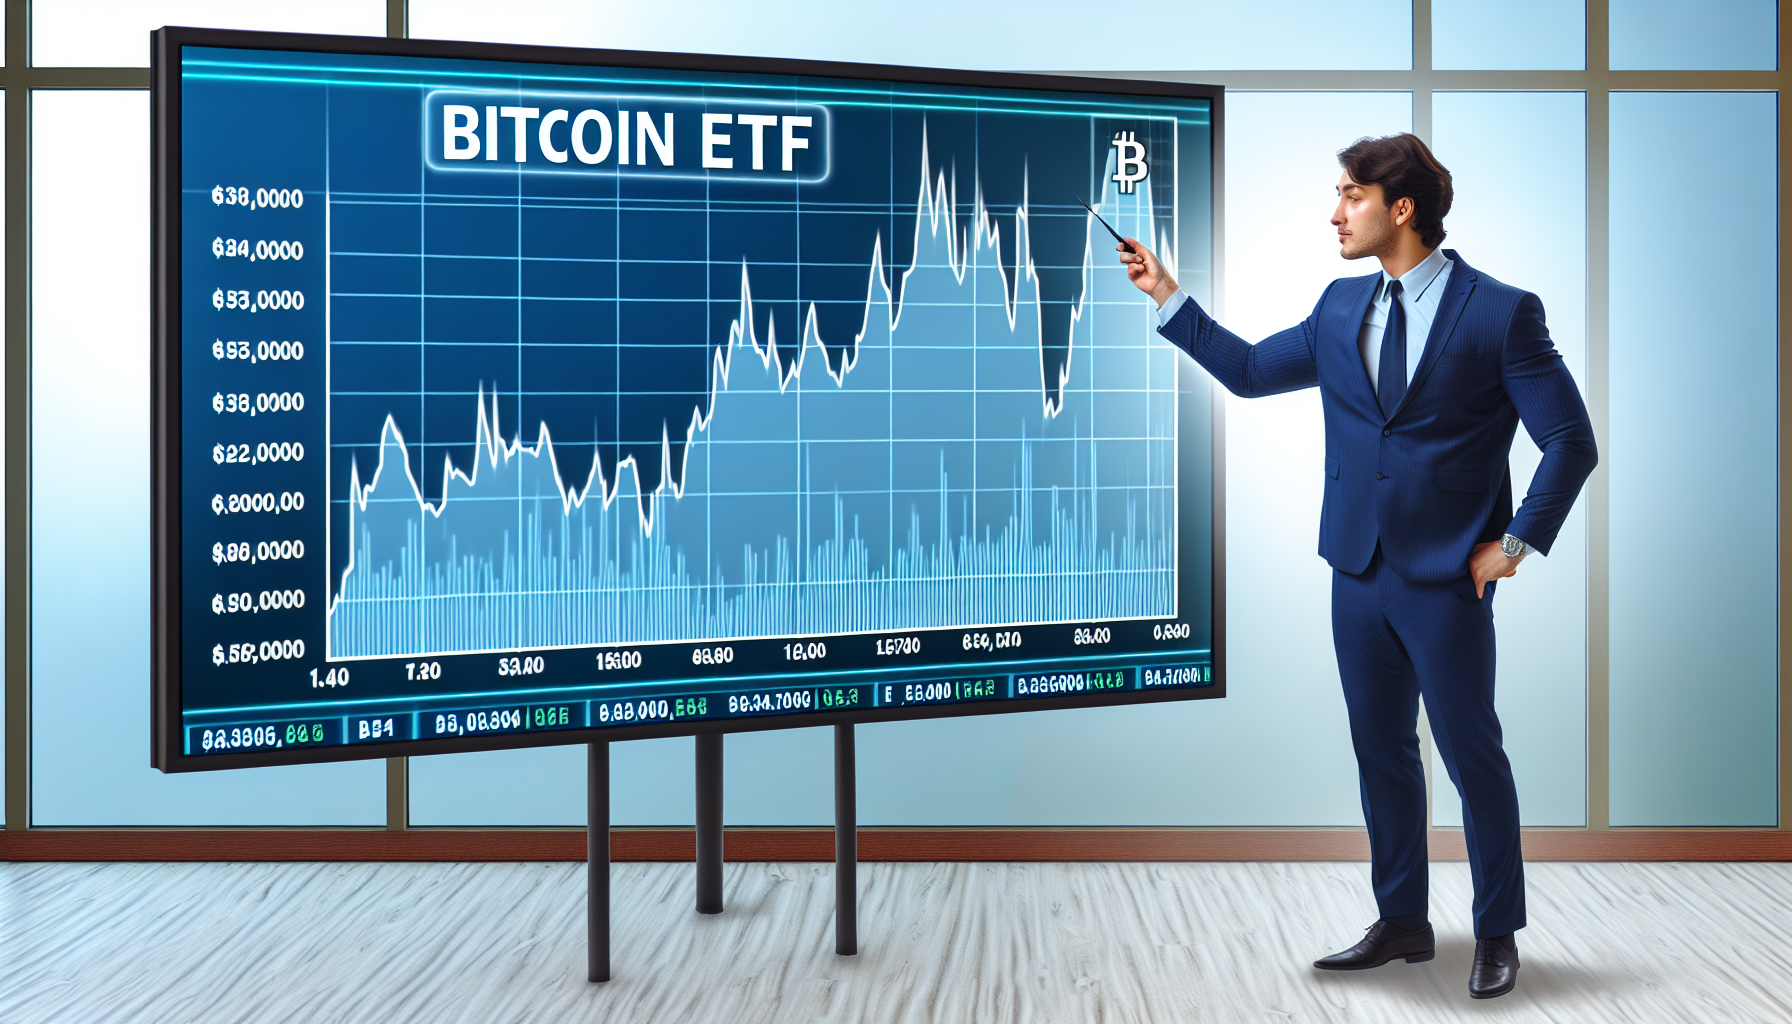 Analyst Glen Goodman argues that the Bitcoin ETF is already factored into the price